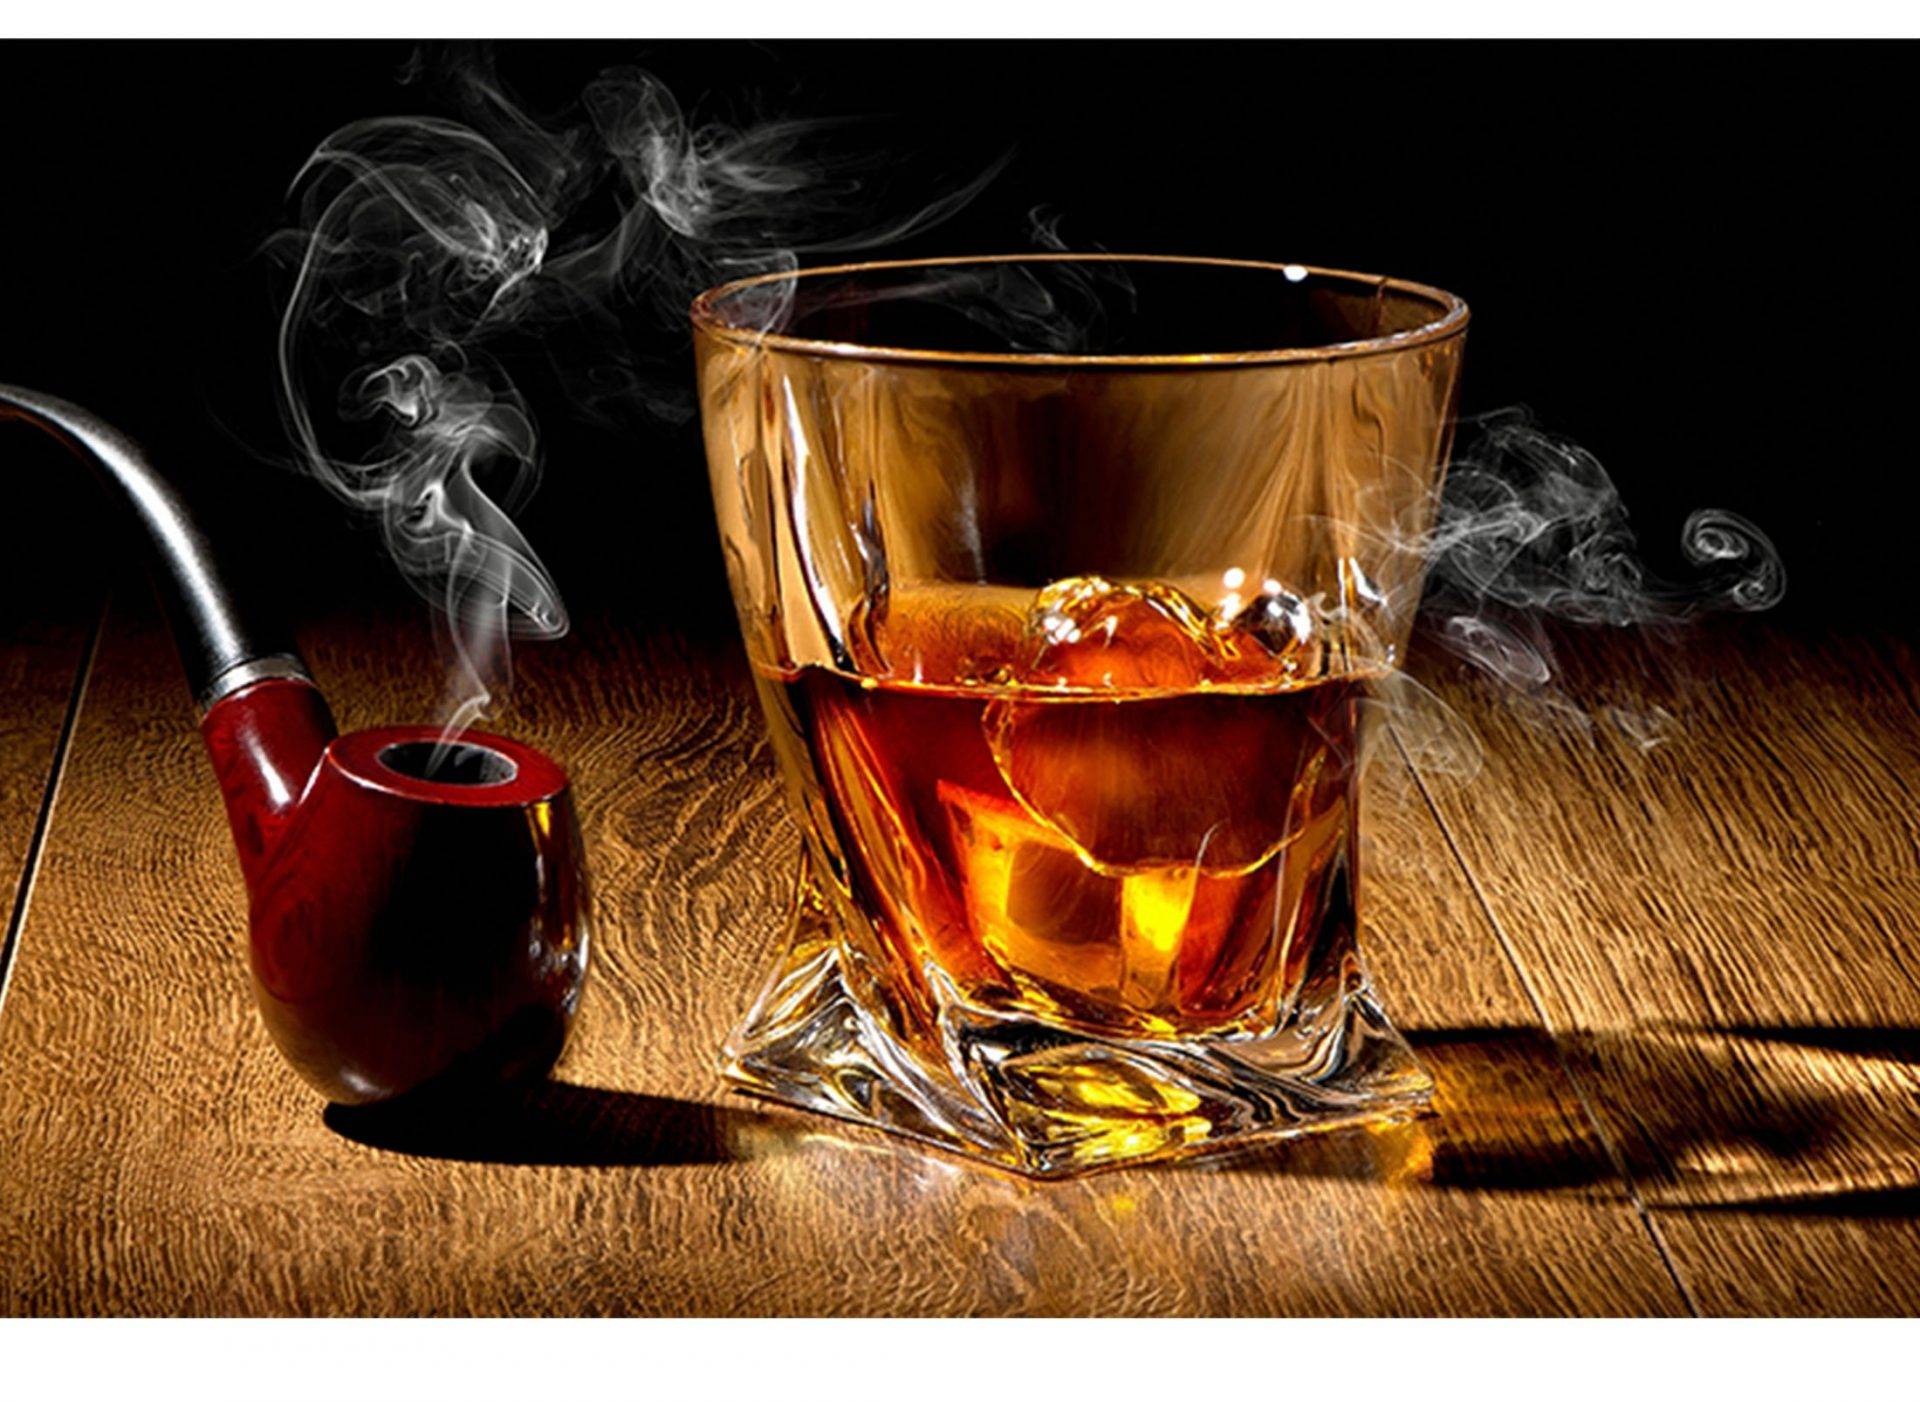 Whiskey with Ice & Pipe Laminated Vinyl Cover Self-Adhesive for Desk and Tables